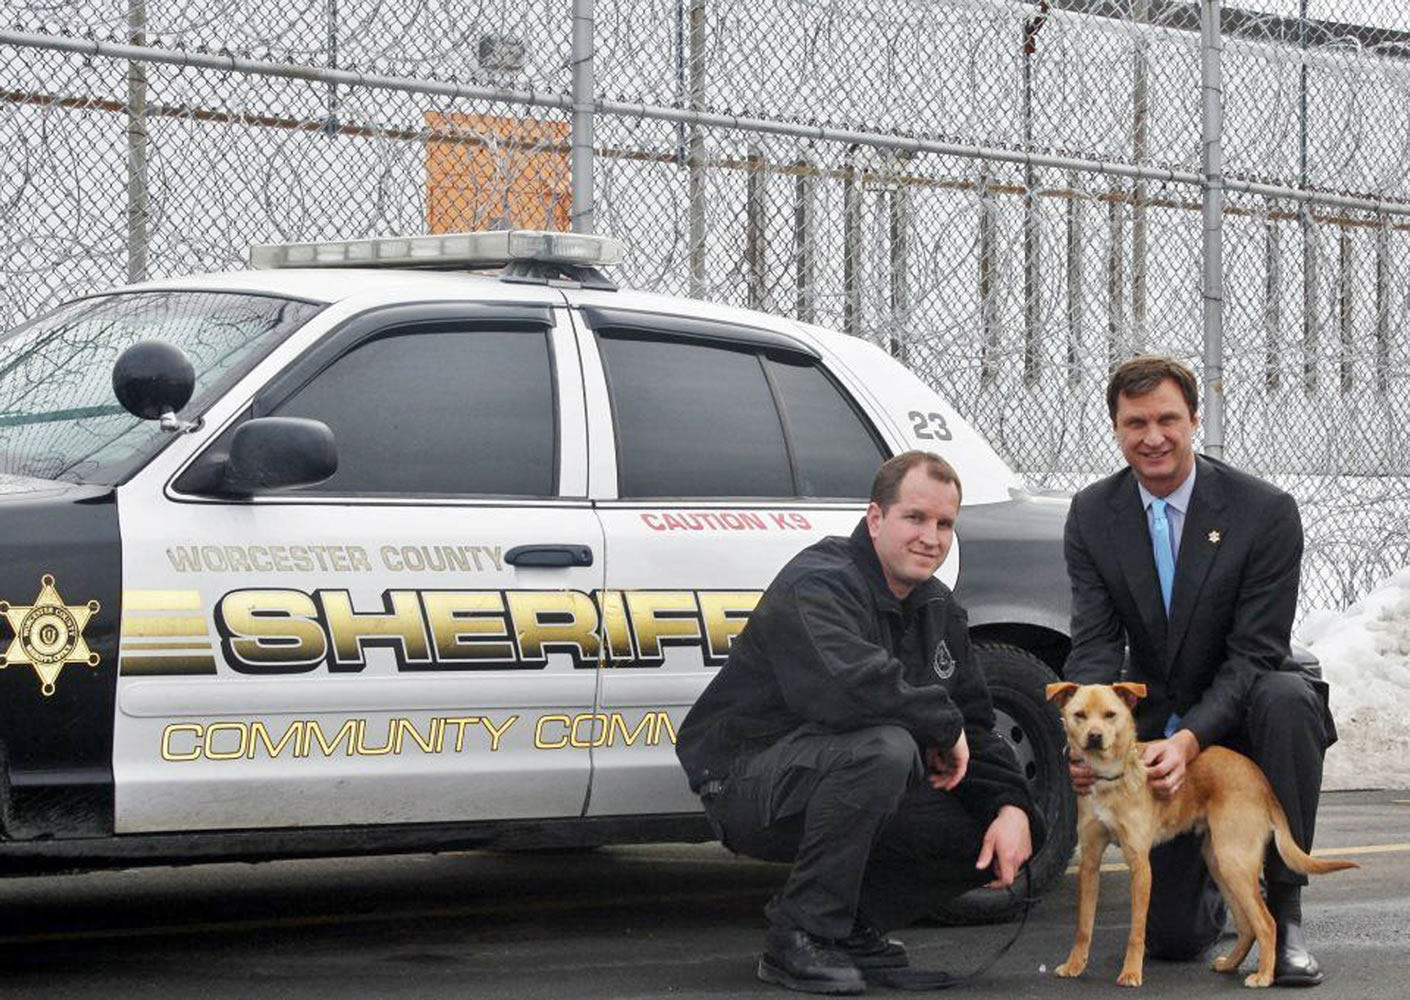 Lt. Thomas Chabot, from left, Sheriff Lew Evangelidis and the department's service dog Nikita, at the Worcester County Jail & House of Correction in West Boylston, Mass. Nikita, the mutt from a Massachusetts animal shelter who got a new life as a K-9 drug-detection dog, stars in an upcoming episode of a new PBS series called "Shelter Me: Partners for Life." The Worcester County sheriff's department in central Massachusetts turned to the shelter for help when there wasn't enough money in the budget to replace its retiring tracking dogs.